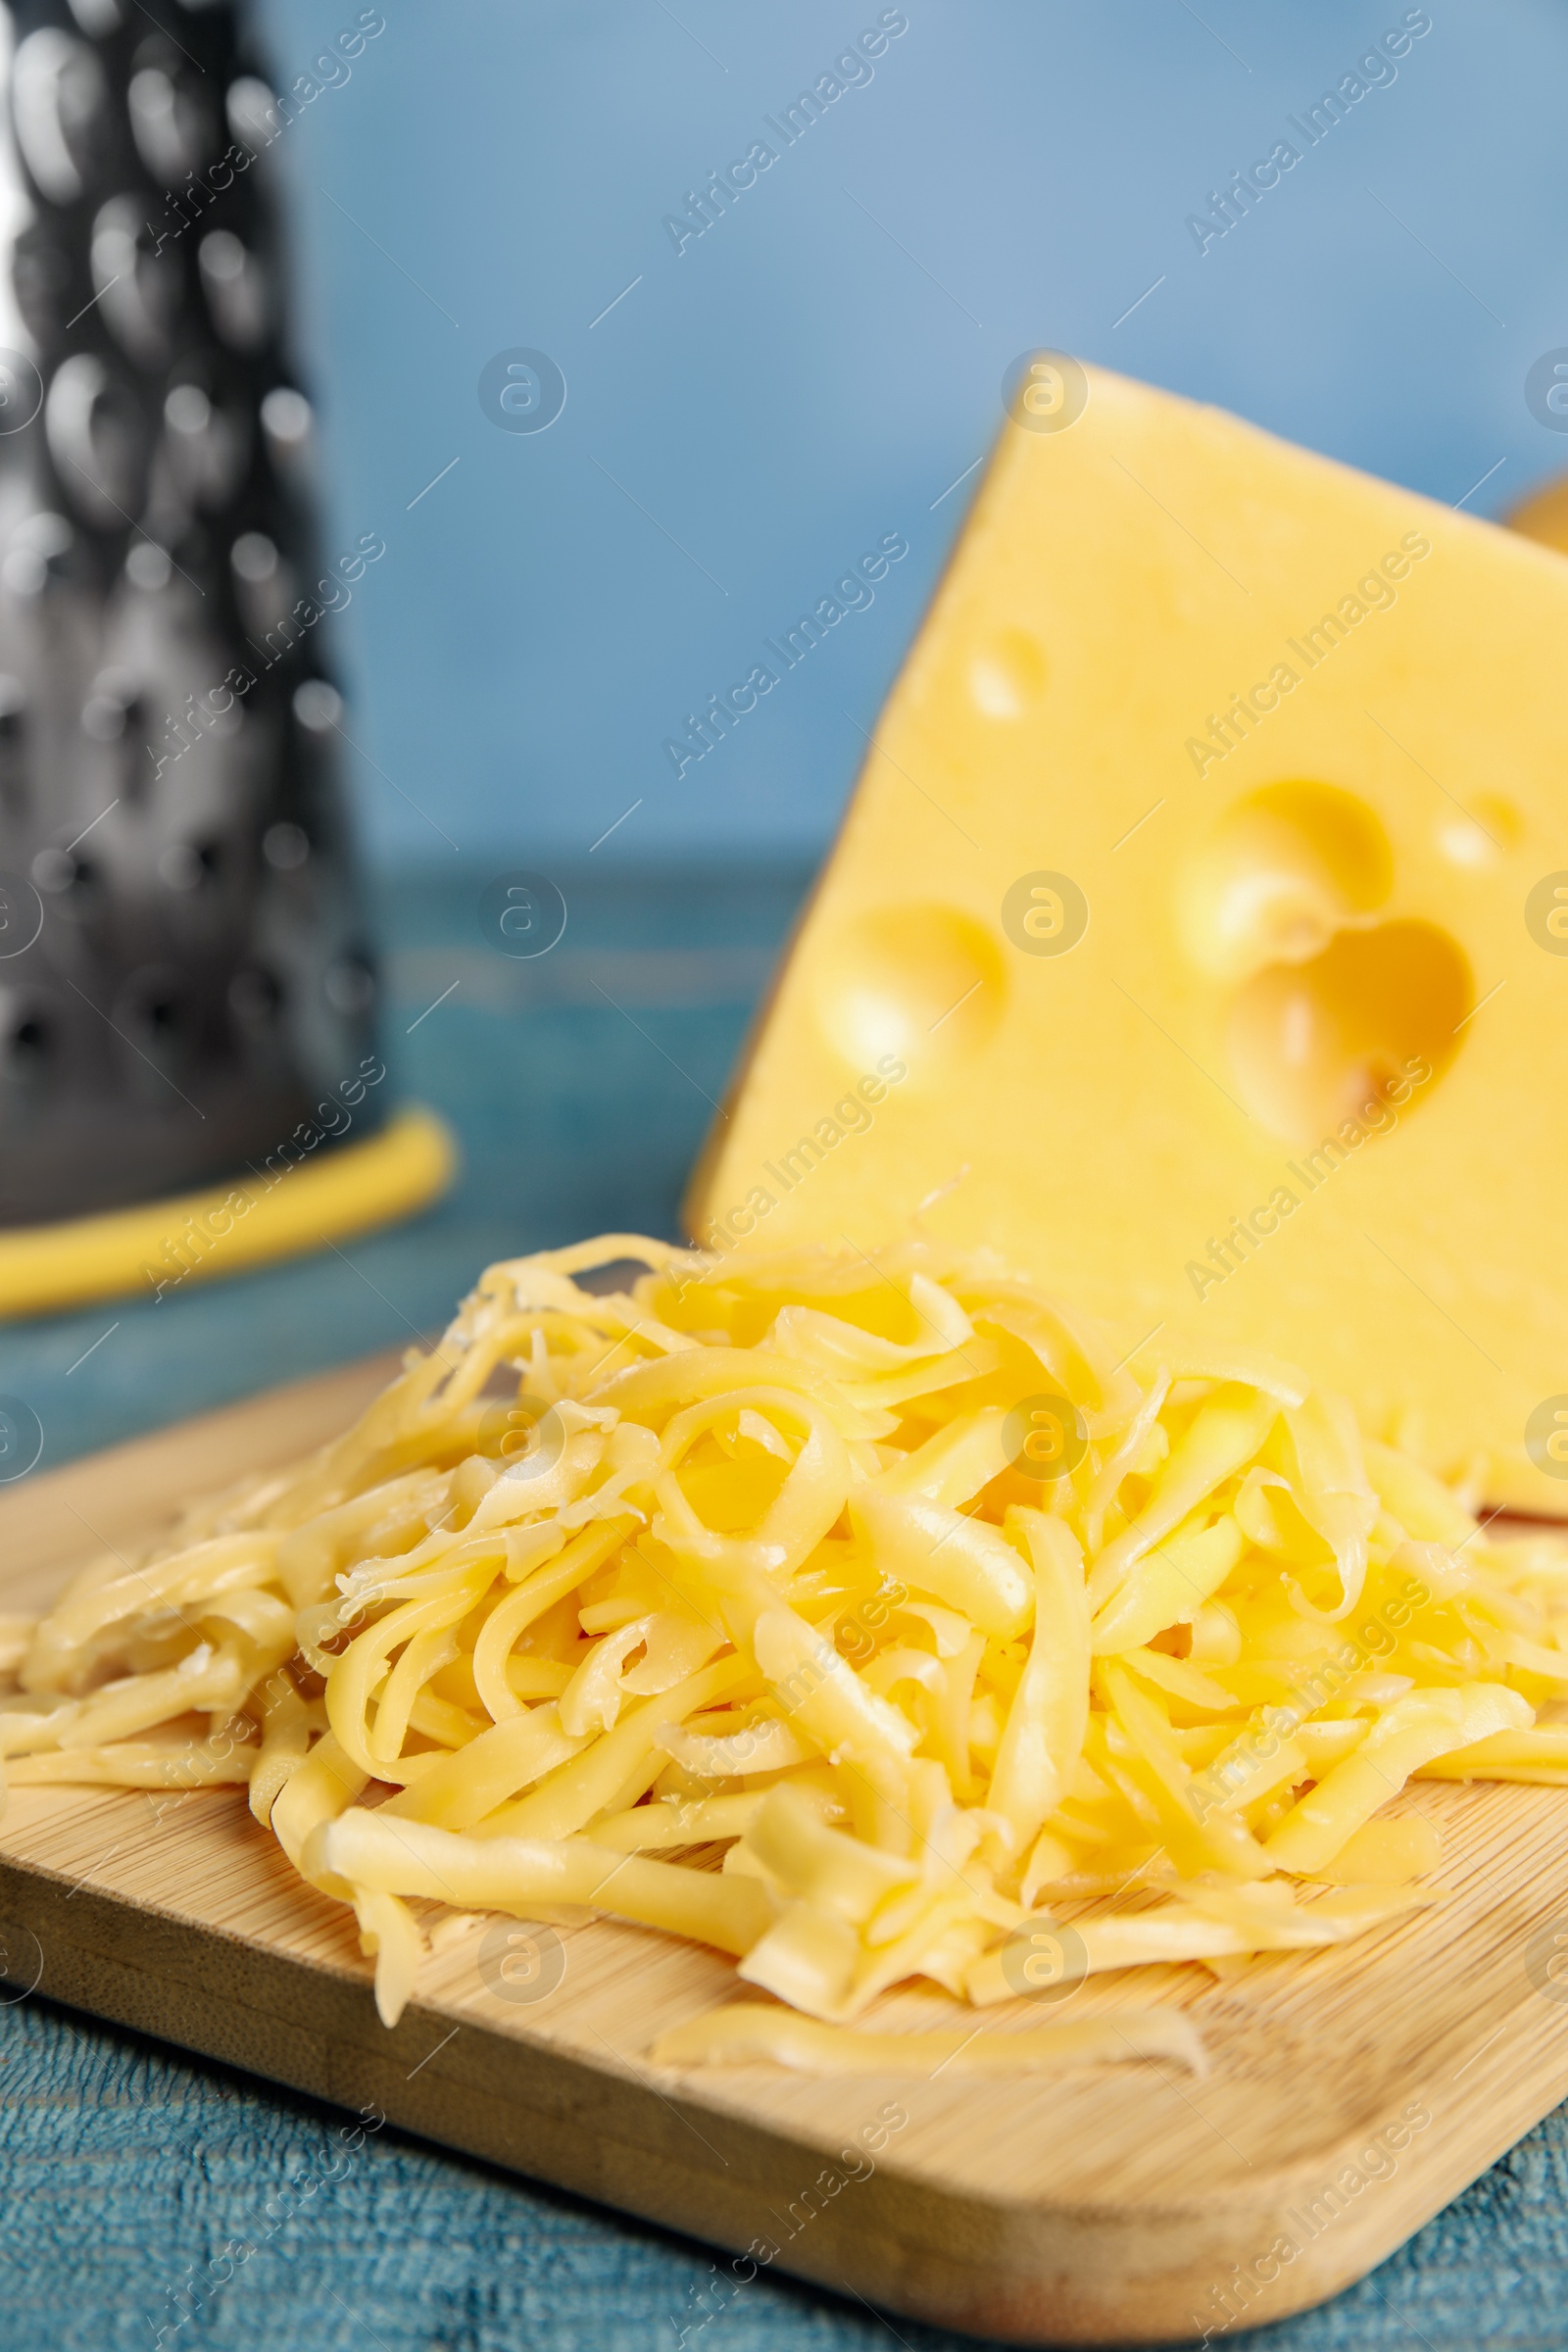 Photo of Tasty grated cheese on blue wooden table